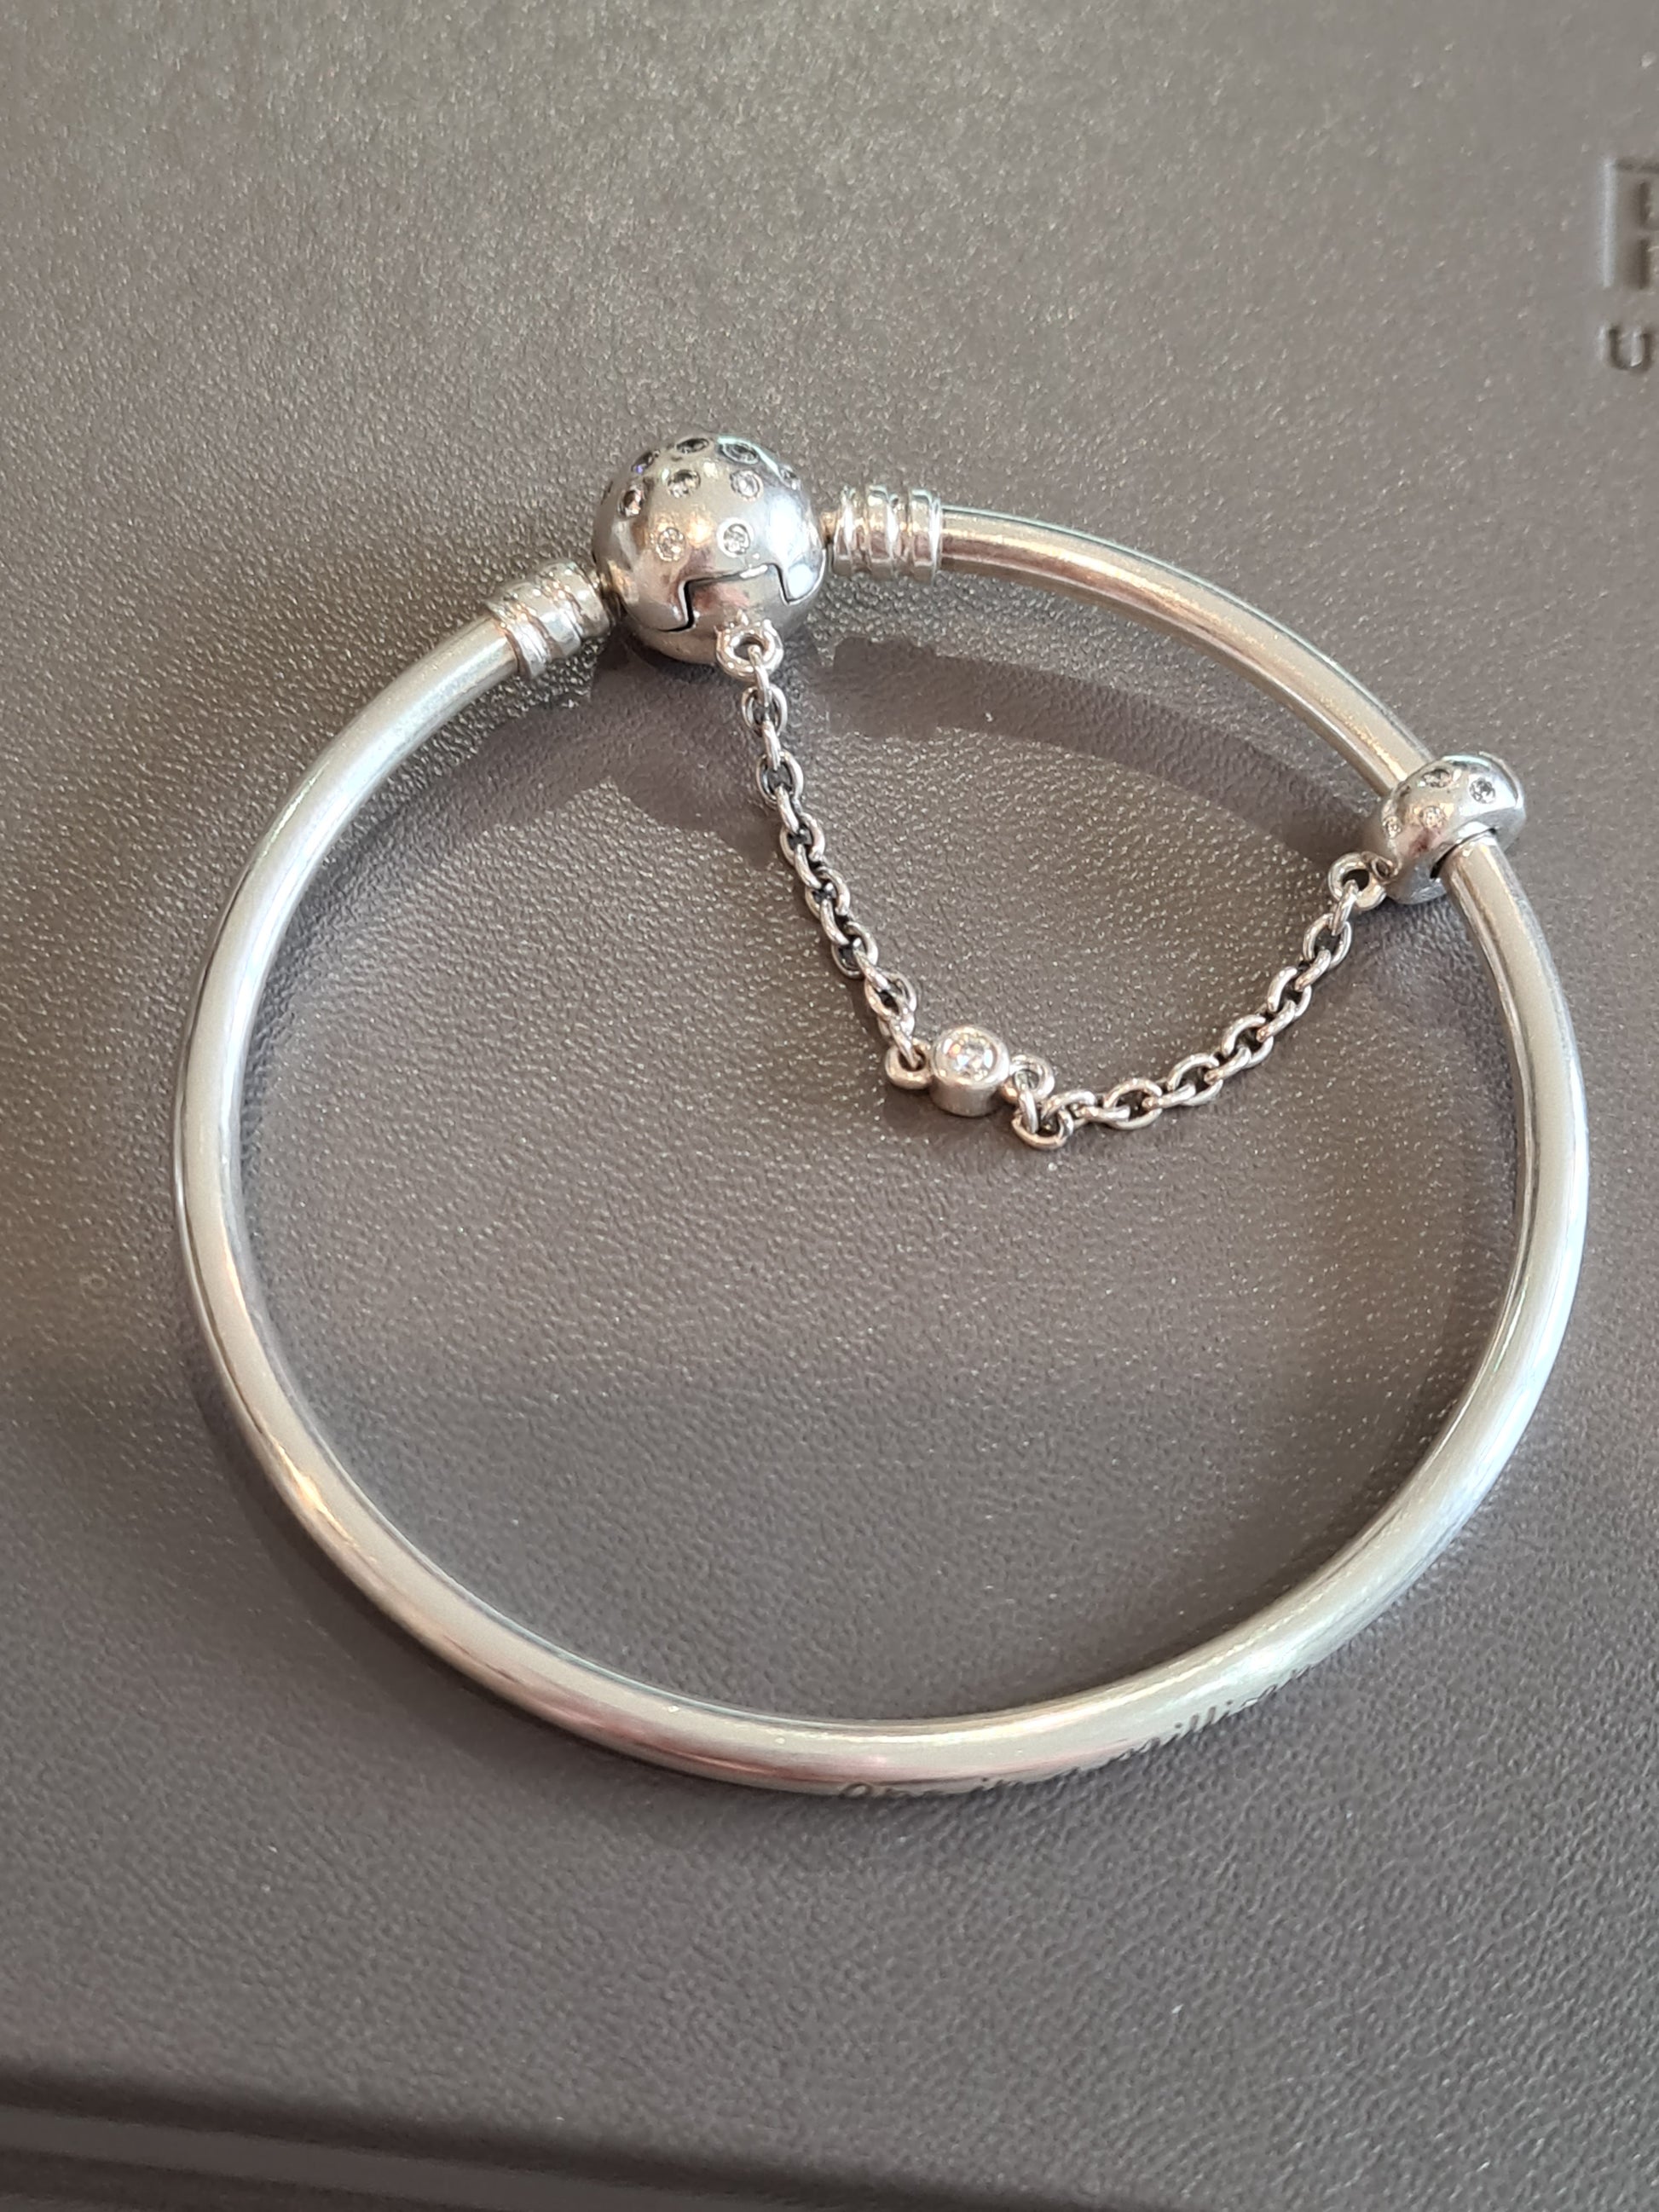 My first real beach find. Pandora sterling bracelet with 11